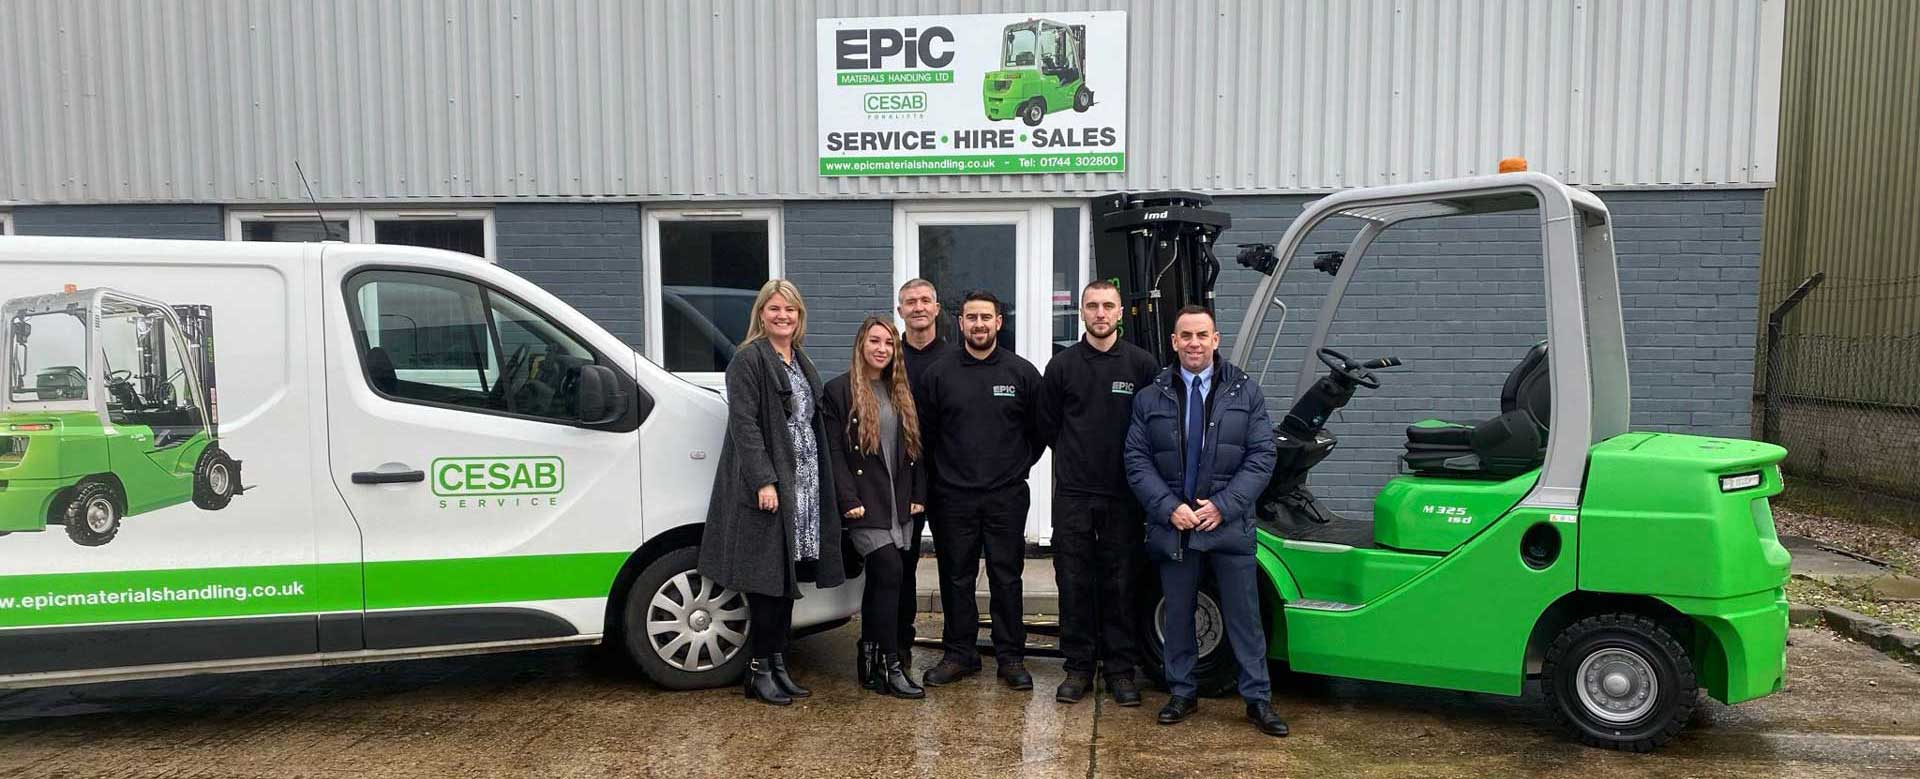 The Epic materials Handling team